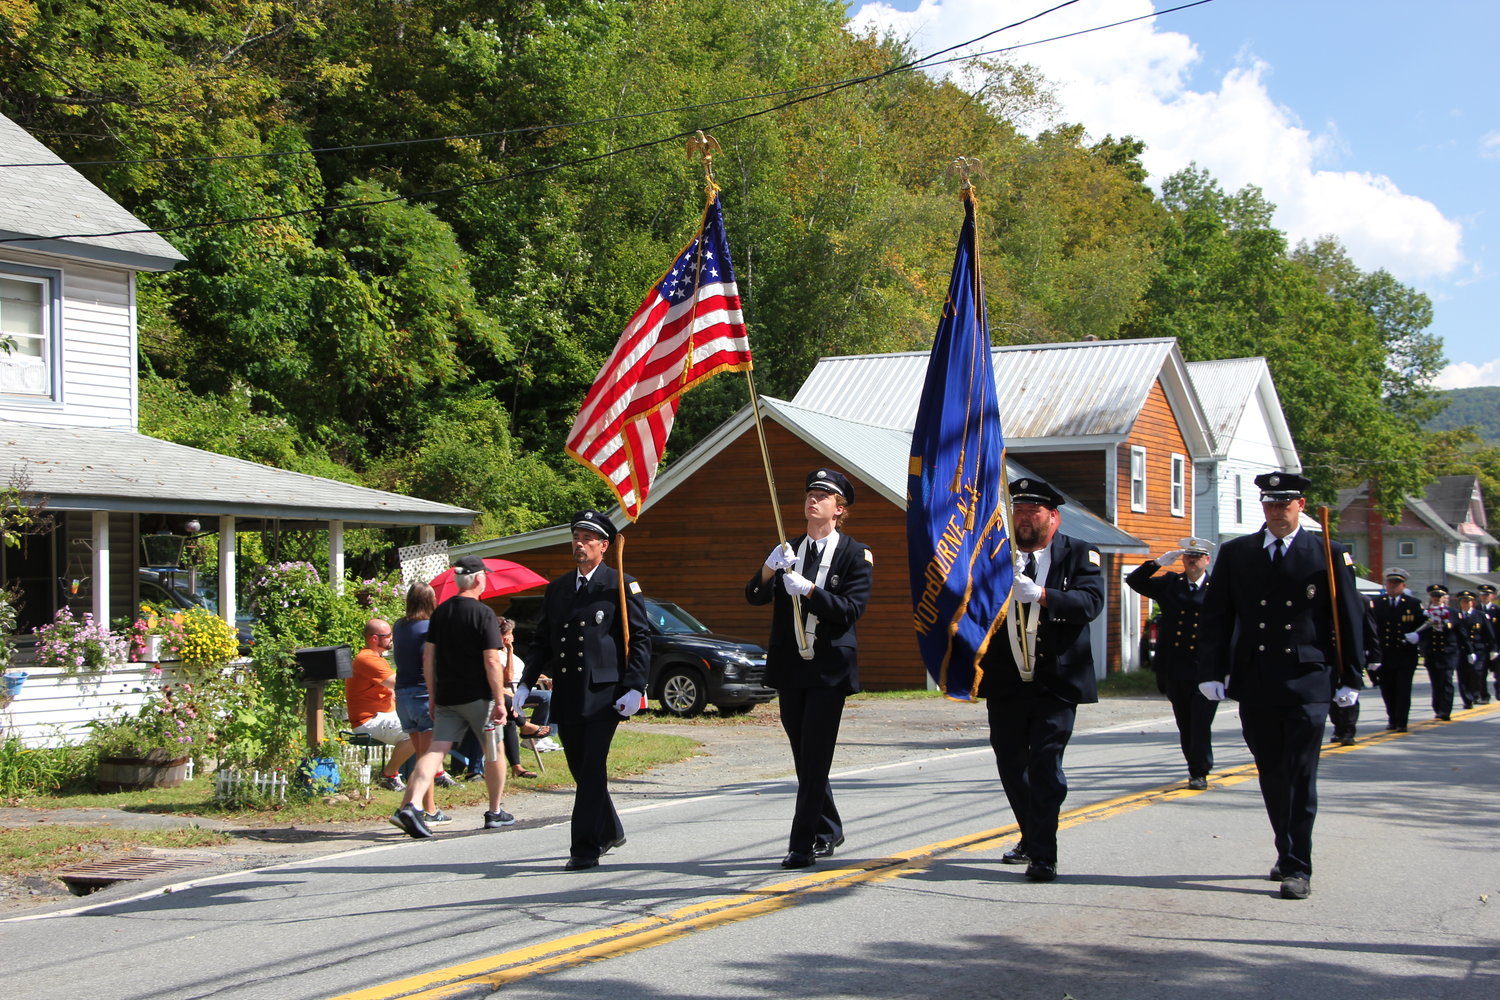 Neighboring Woodbourne Fire Department had an impressive color guard.